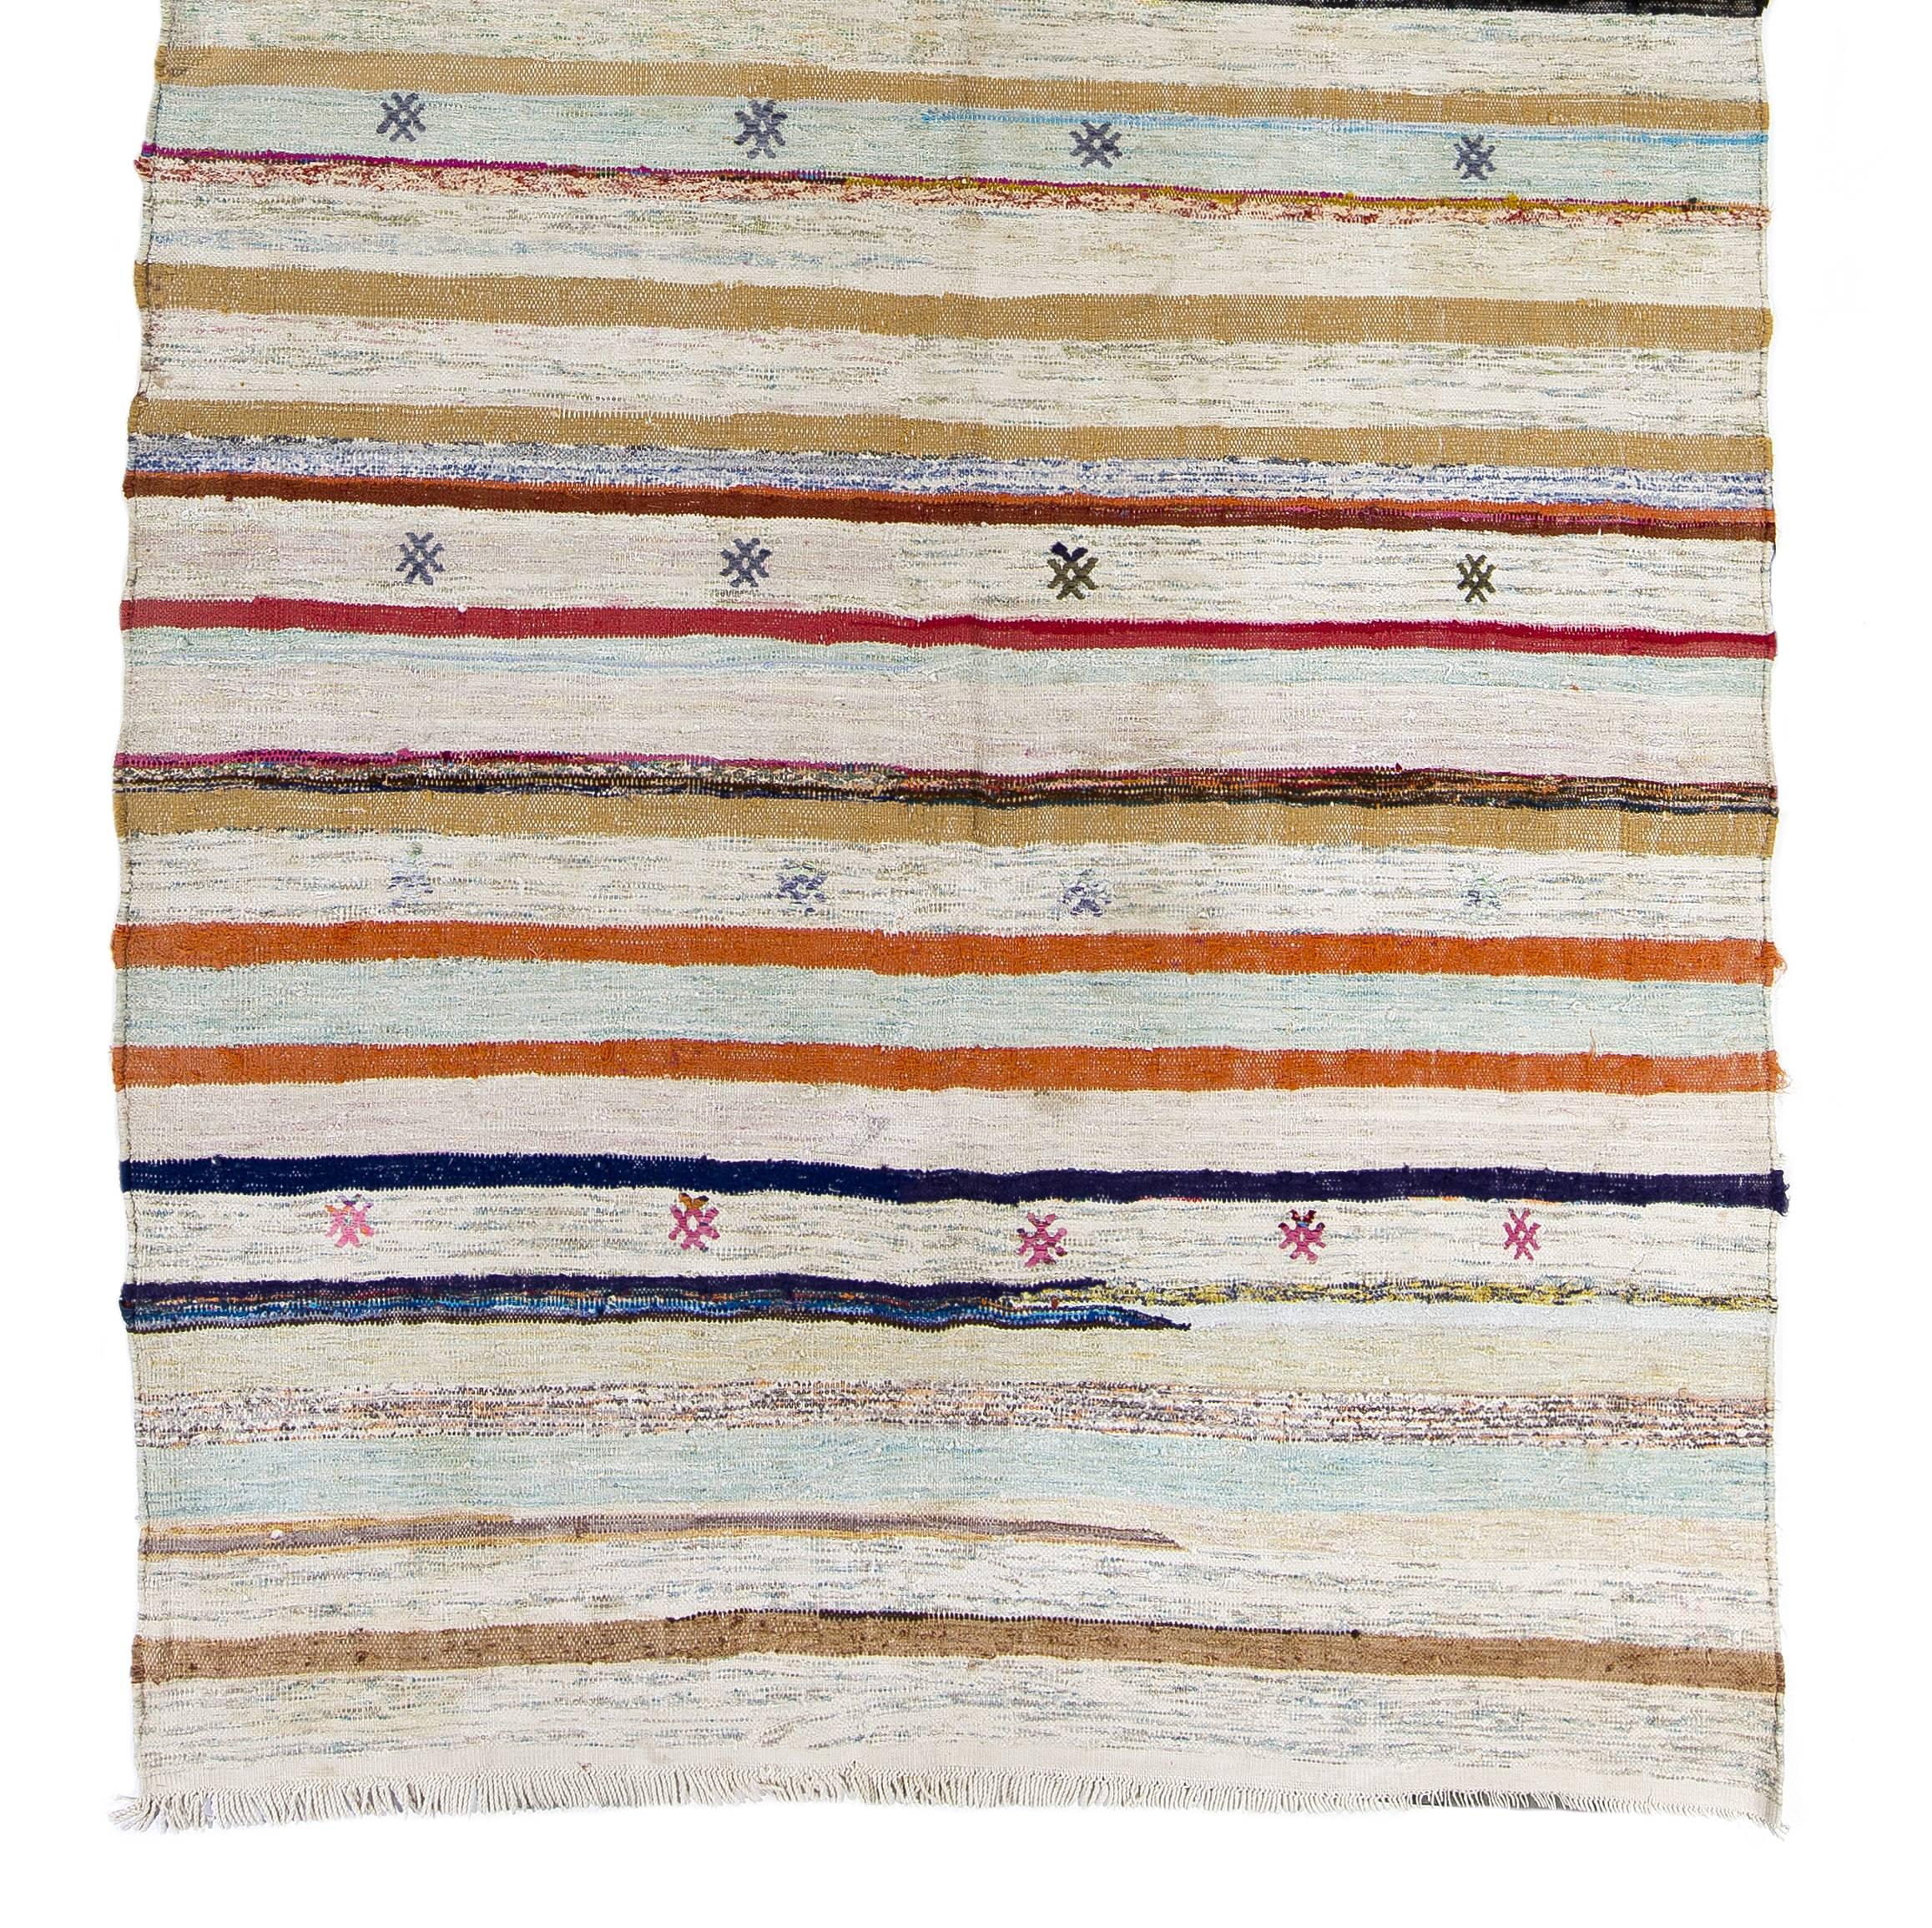 A simple yet beautiful cotton rug handwoven by the nomadic tribes in South Central Turkey. Very good condition, sturdy and clean.